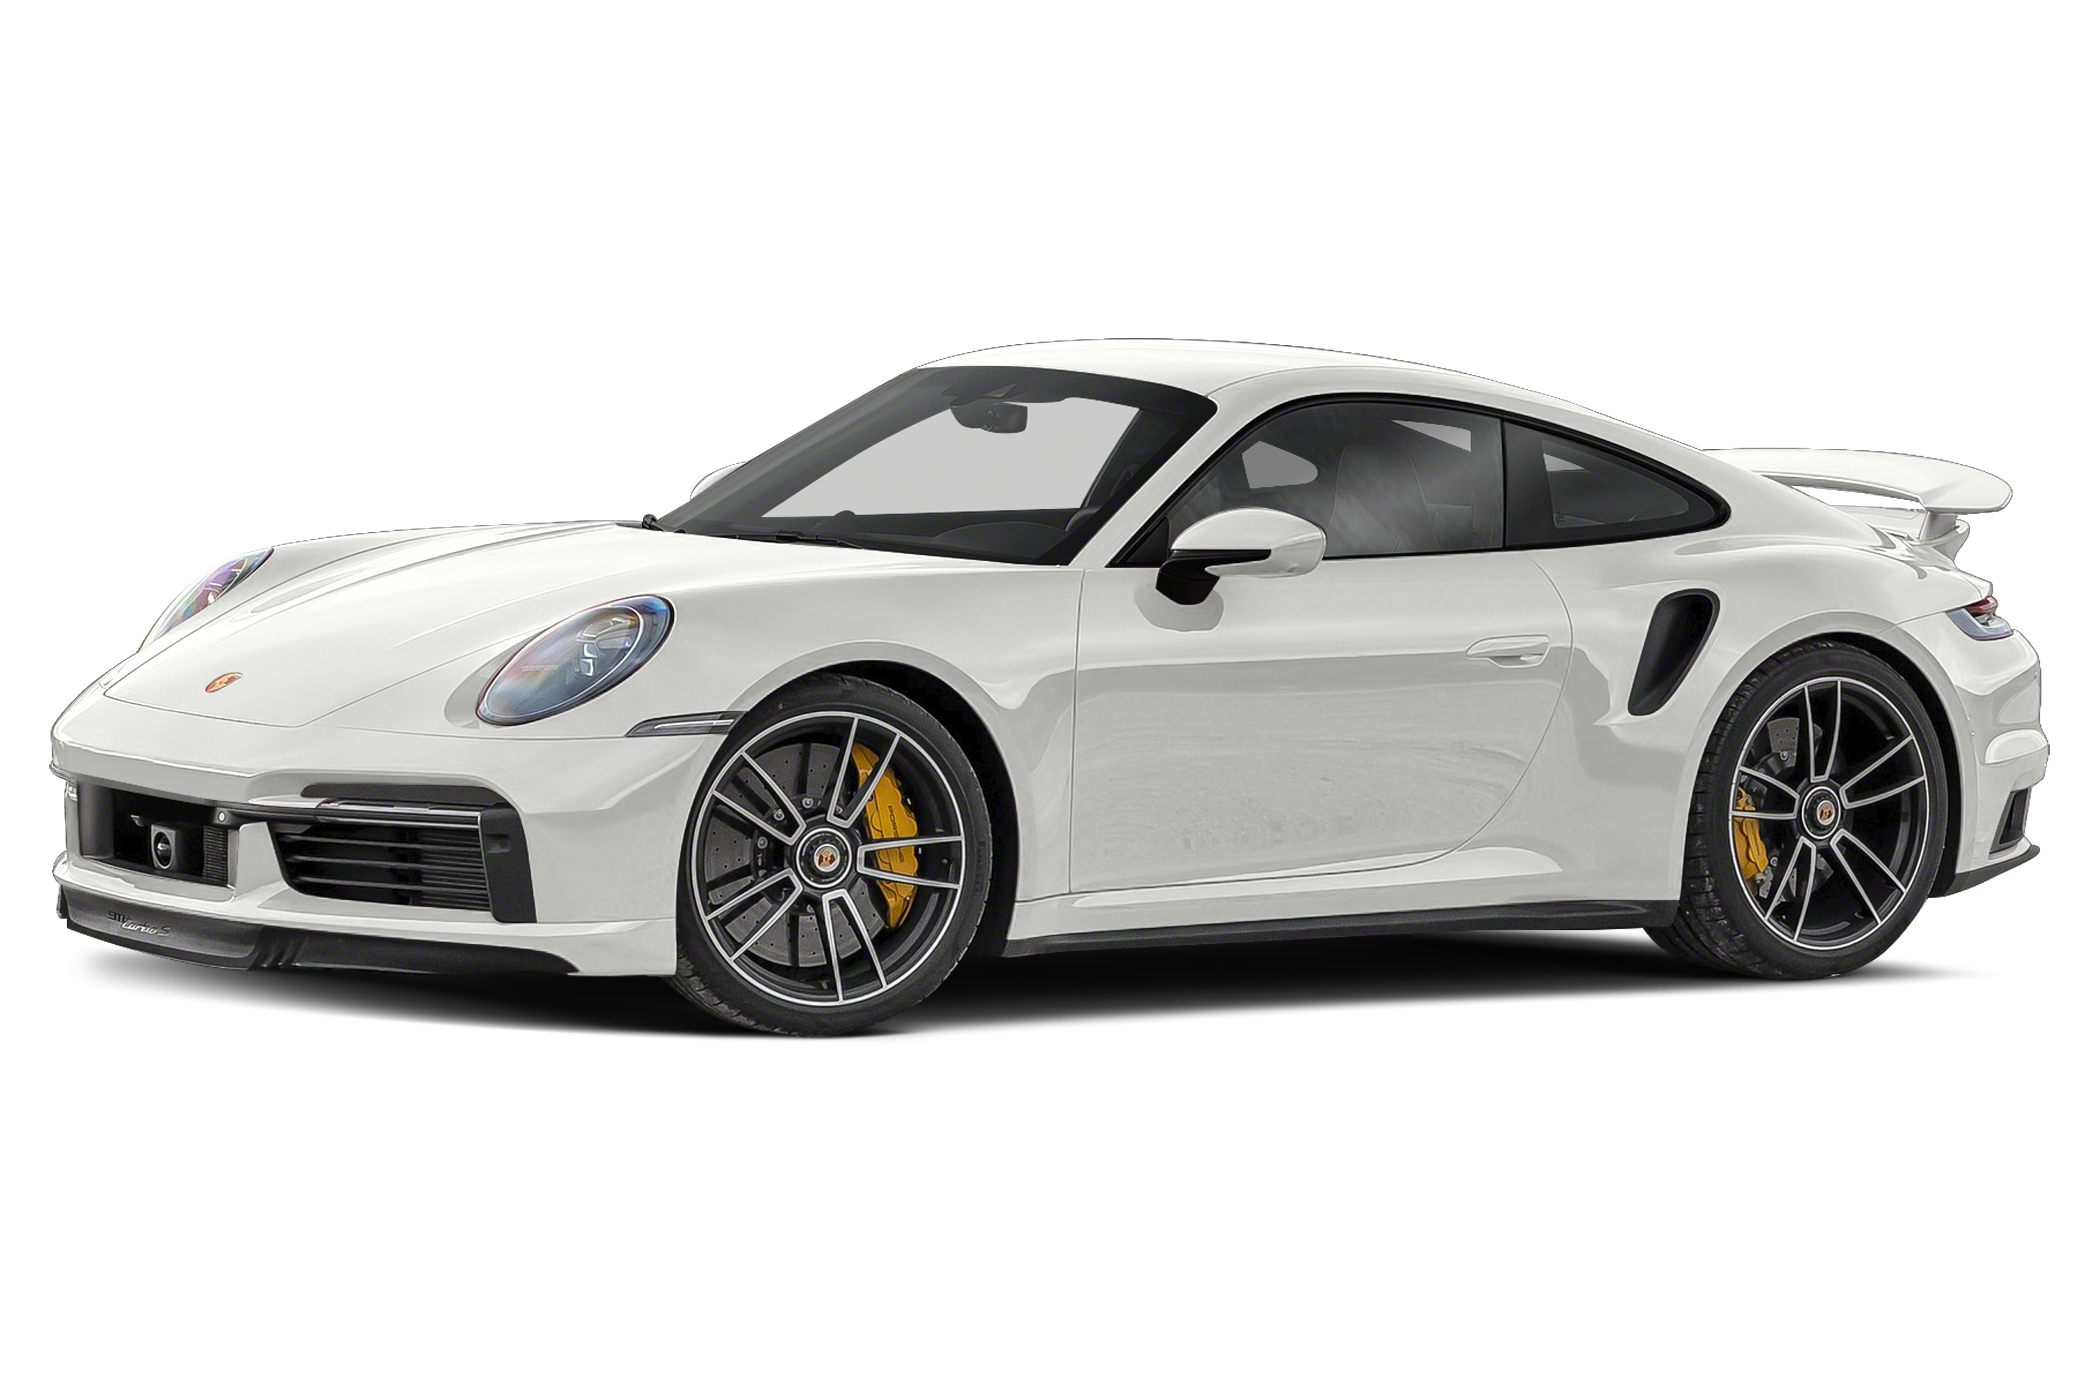 Porsche 911 Car Mileage, Engine, Price, Space, Safety and Features